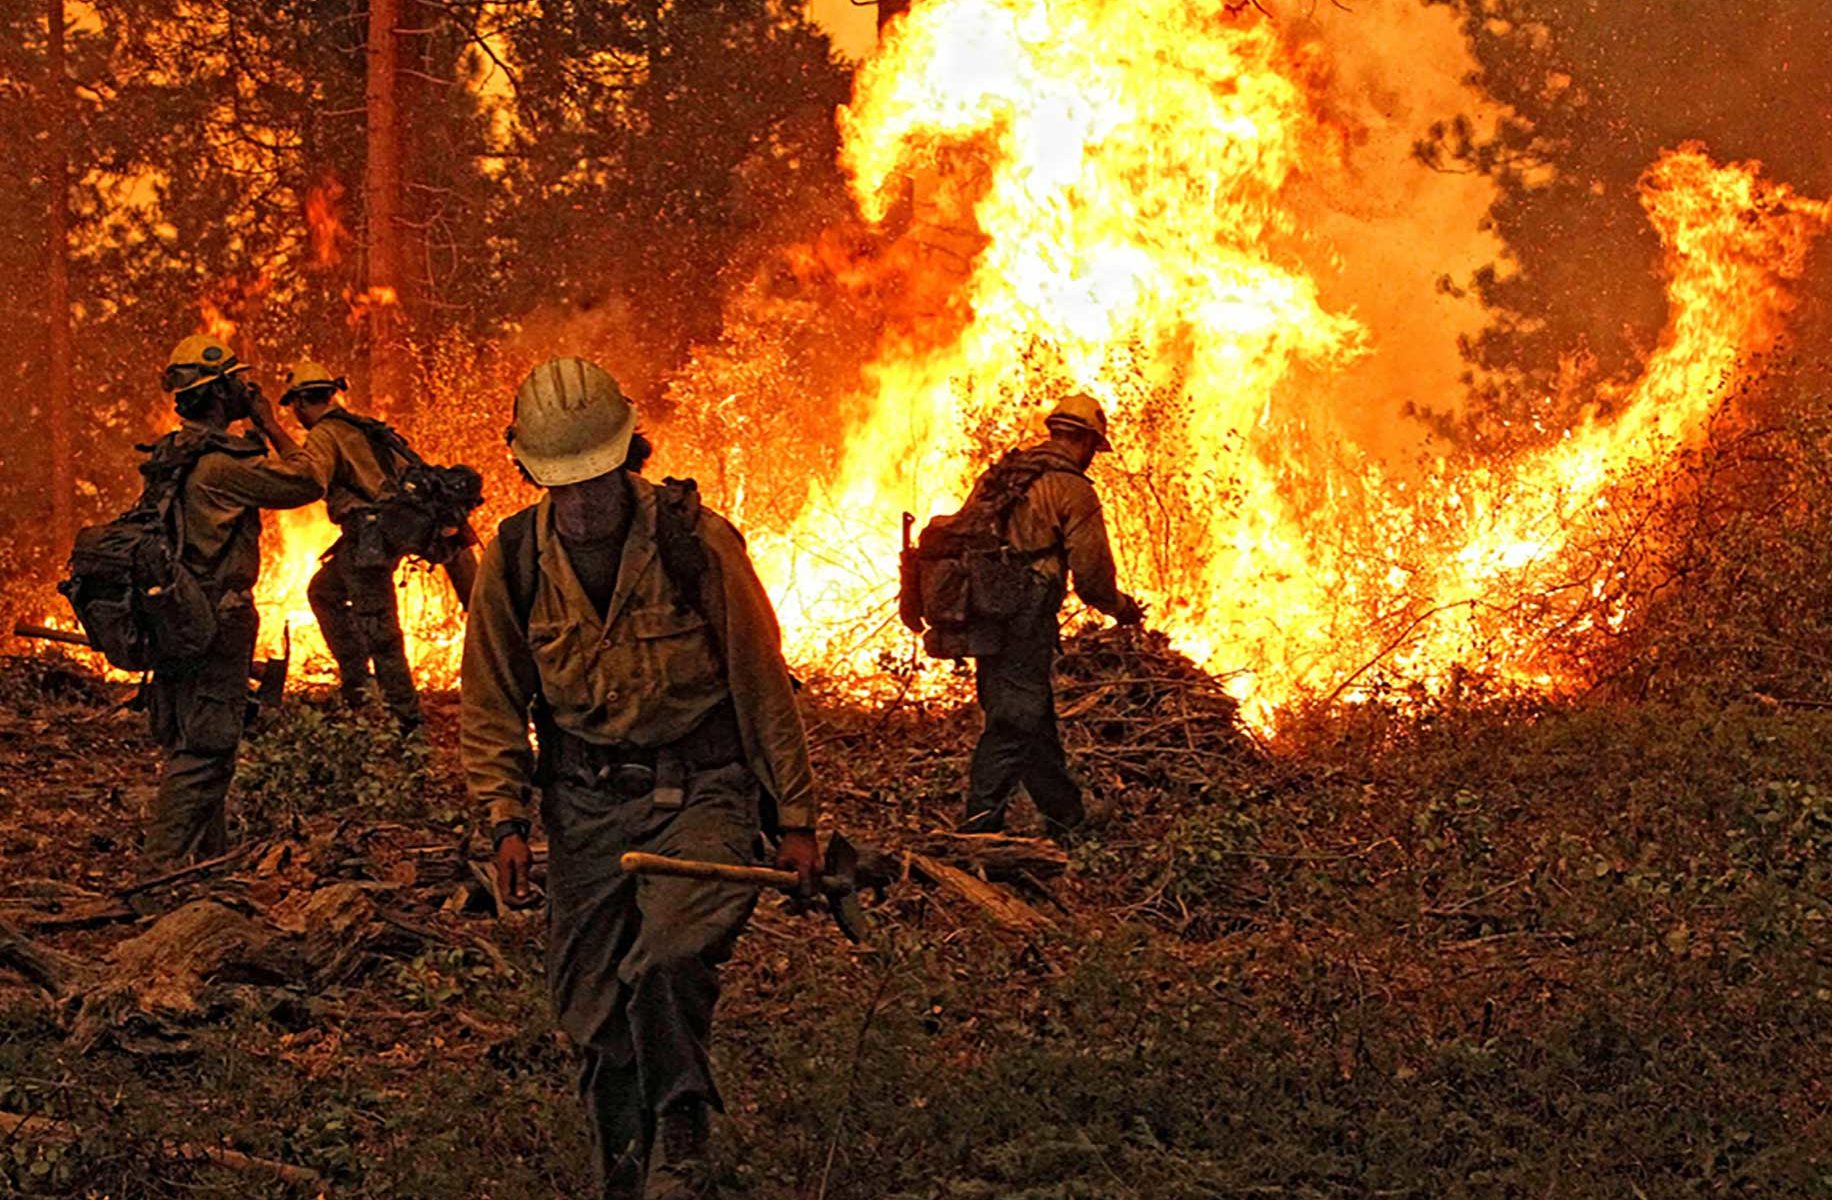 Fire War 2017: 11,000 firefighters battle 18 large California wildfires in October